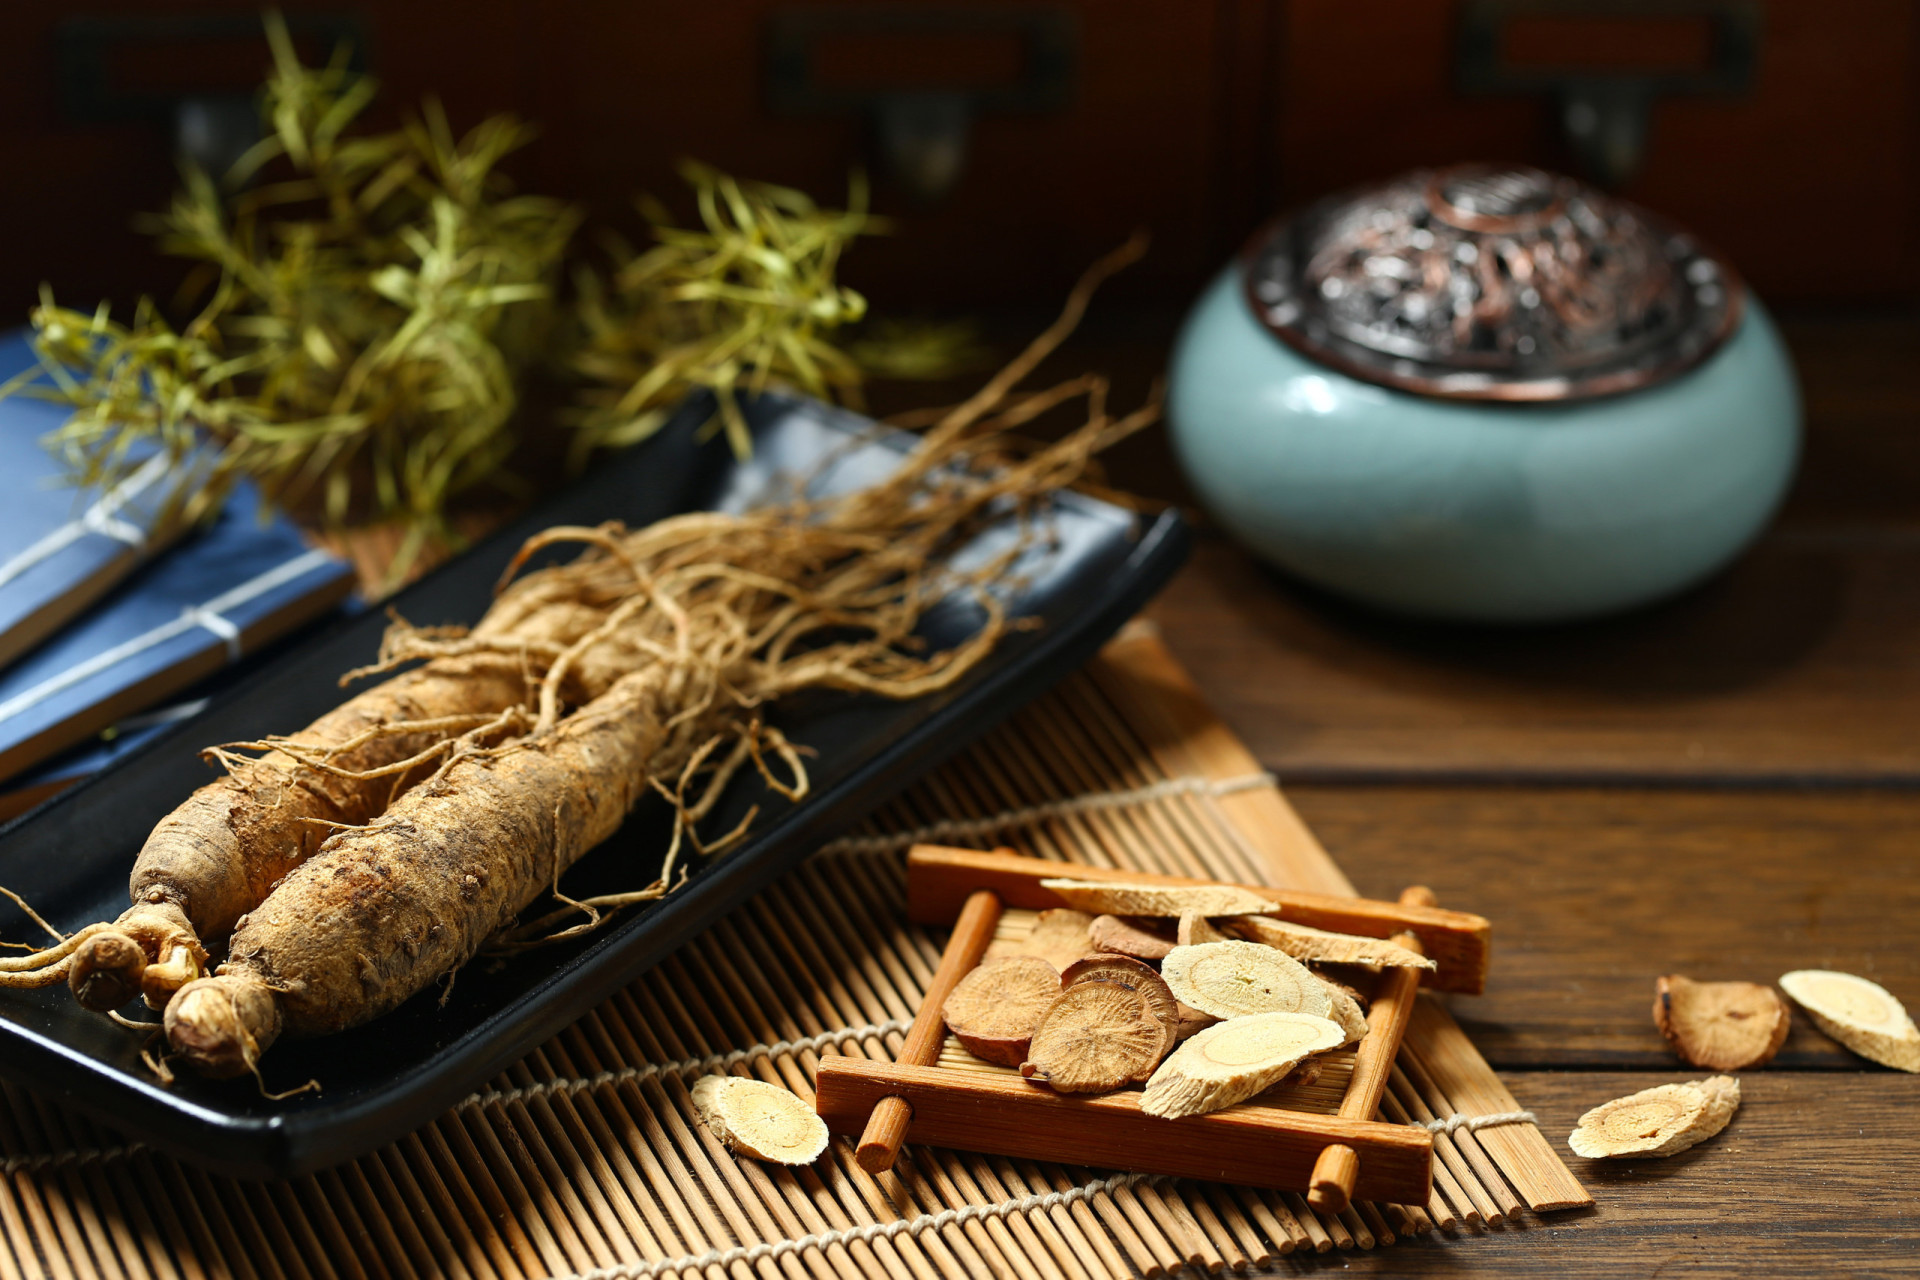 <p>Ginseng (<em>panax ginseng</em>) can lower blood concentrations of warfarin, and induce mania if used with phenelzine. It may decrease the effectiveness of antihypertensive medications, including nifedipine.</p><p>You may also like:<a href="https://www.starsinsider.com/n/216548?utm_source=msn.com&utm_medium=display&utm_campaign=referral_description&utm_content=556697en-en"> Tips for impeccable hair without leaving the comfort of home</a></p>